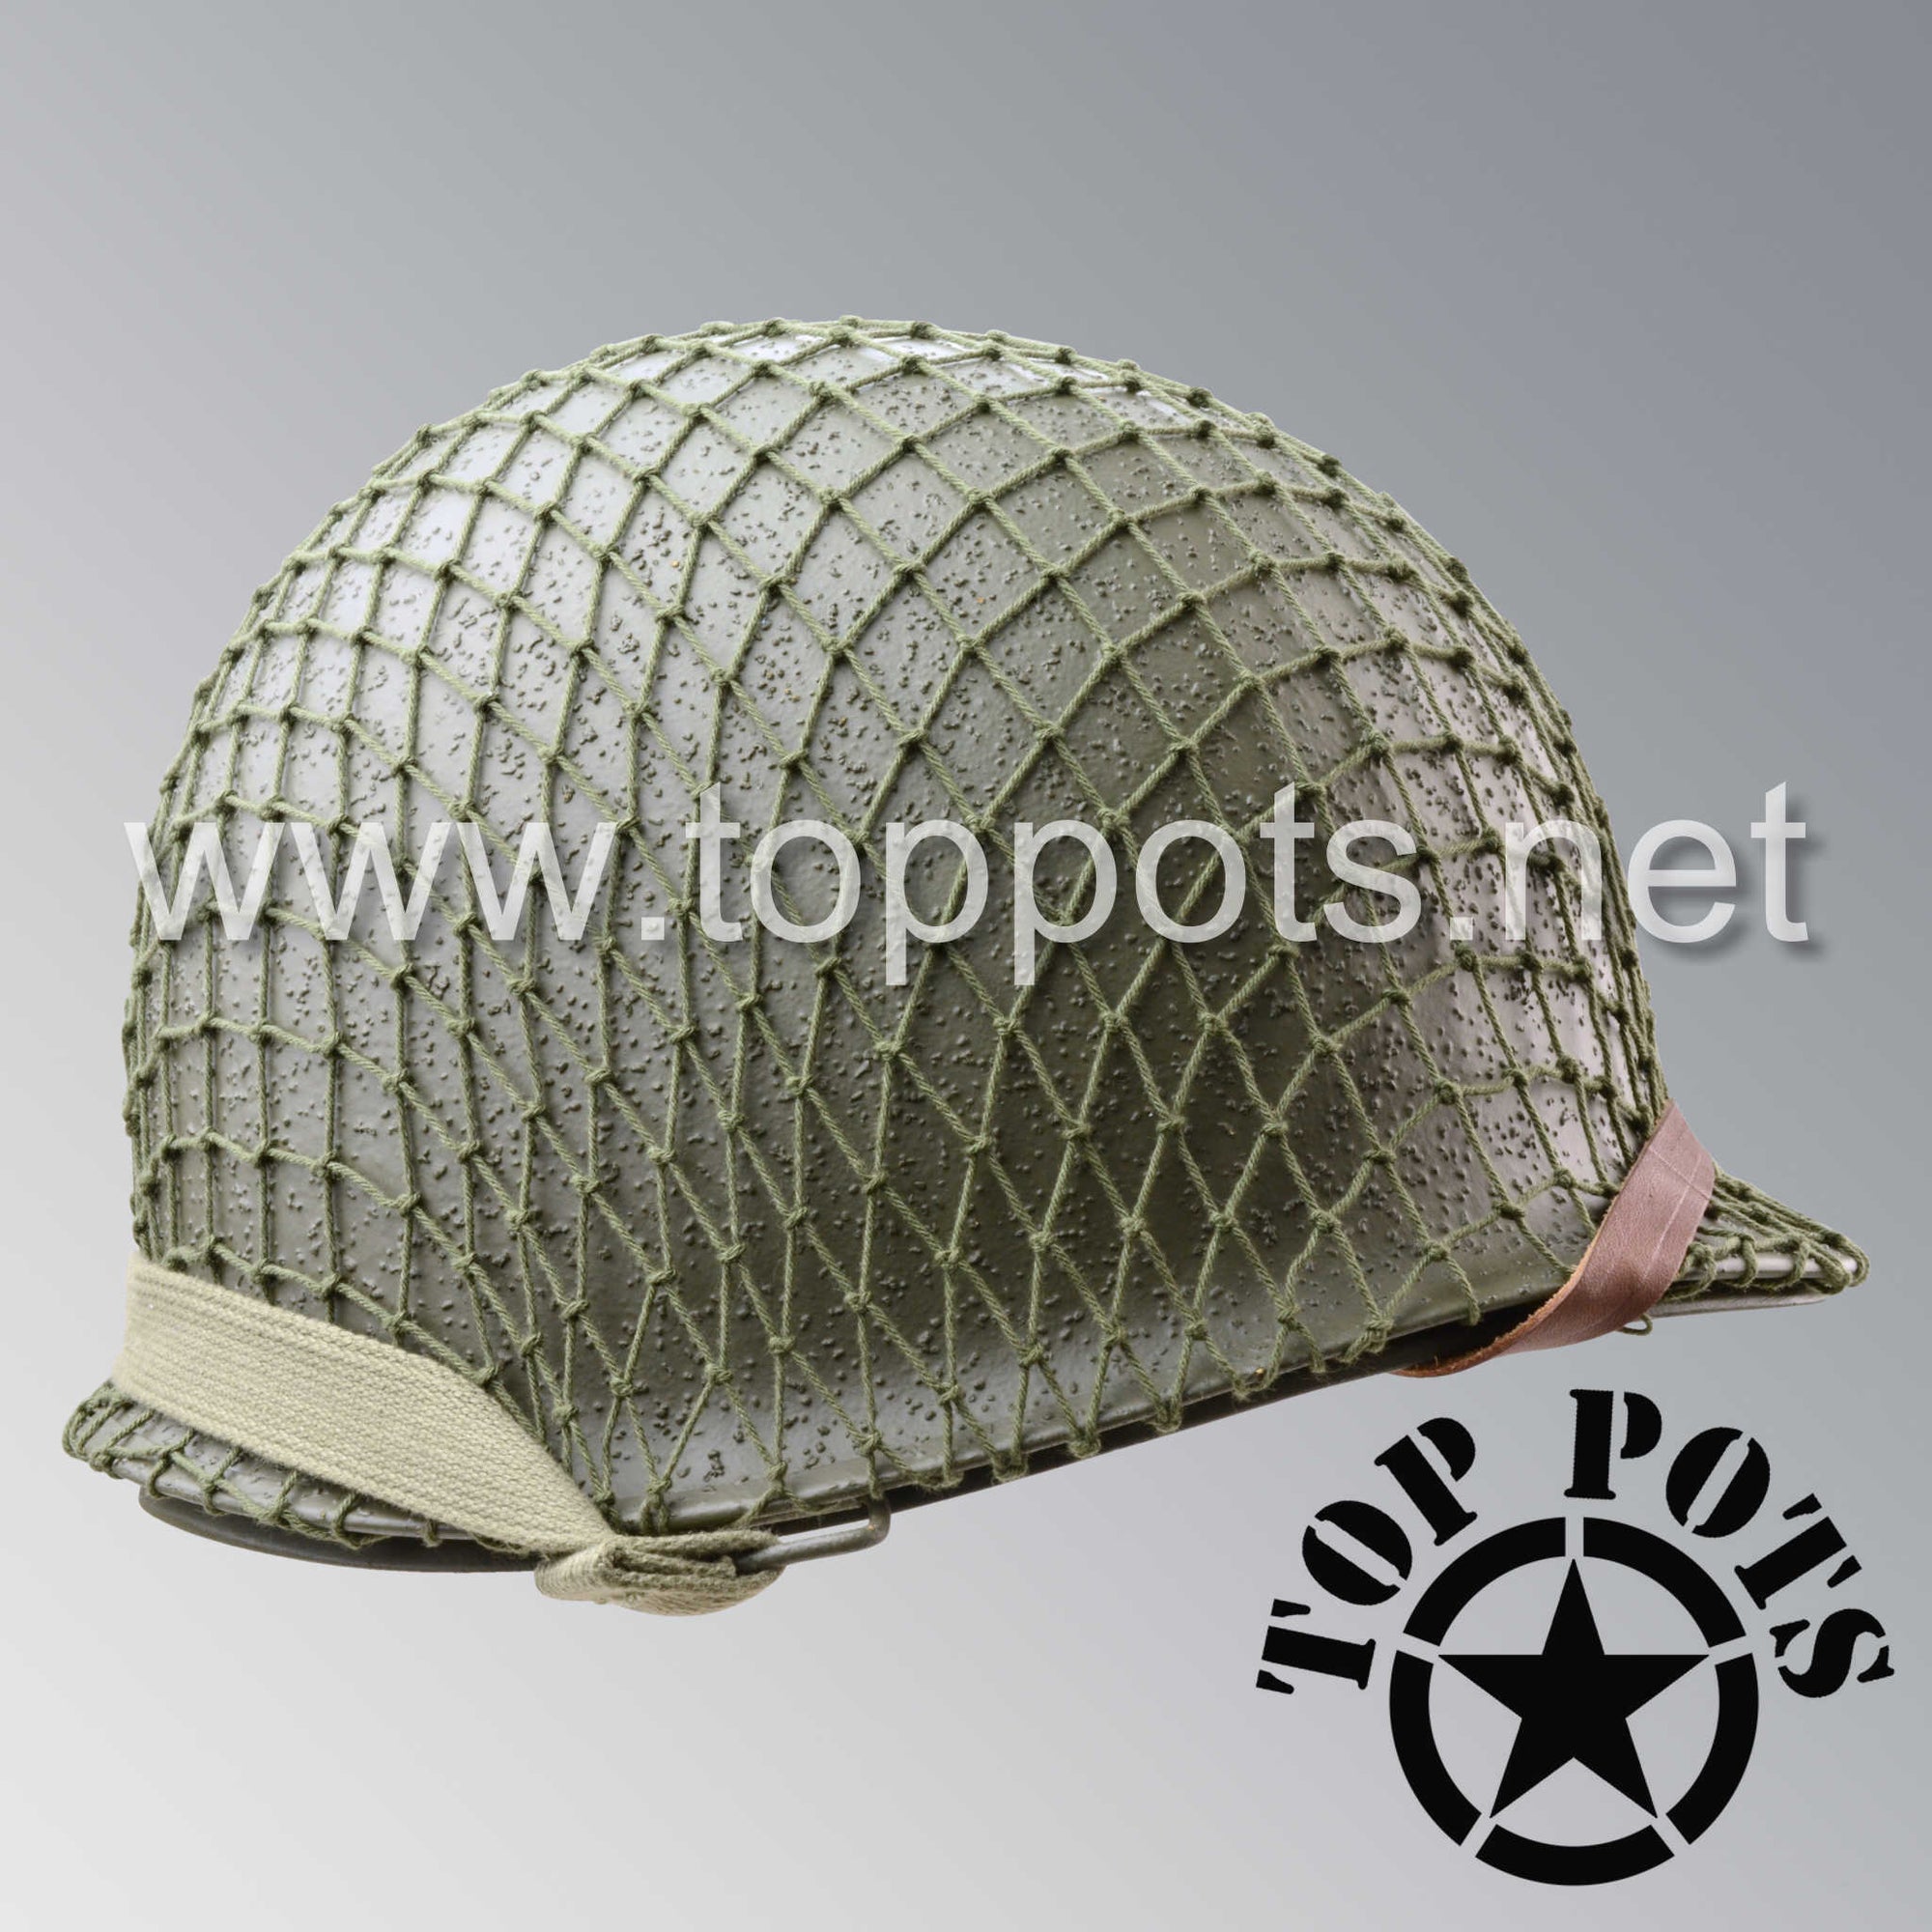 WWII US Army Original M1 Infantry or M1C Paratrooper Airborne Helmet Net - OD 7 Cotton (NET ONLY... HELMET NOT INCLUDED)